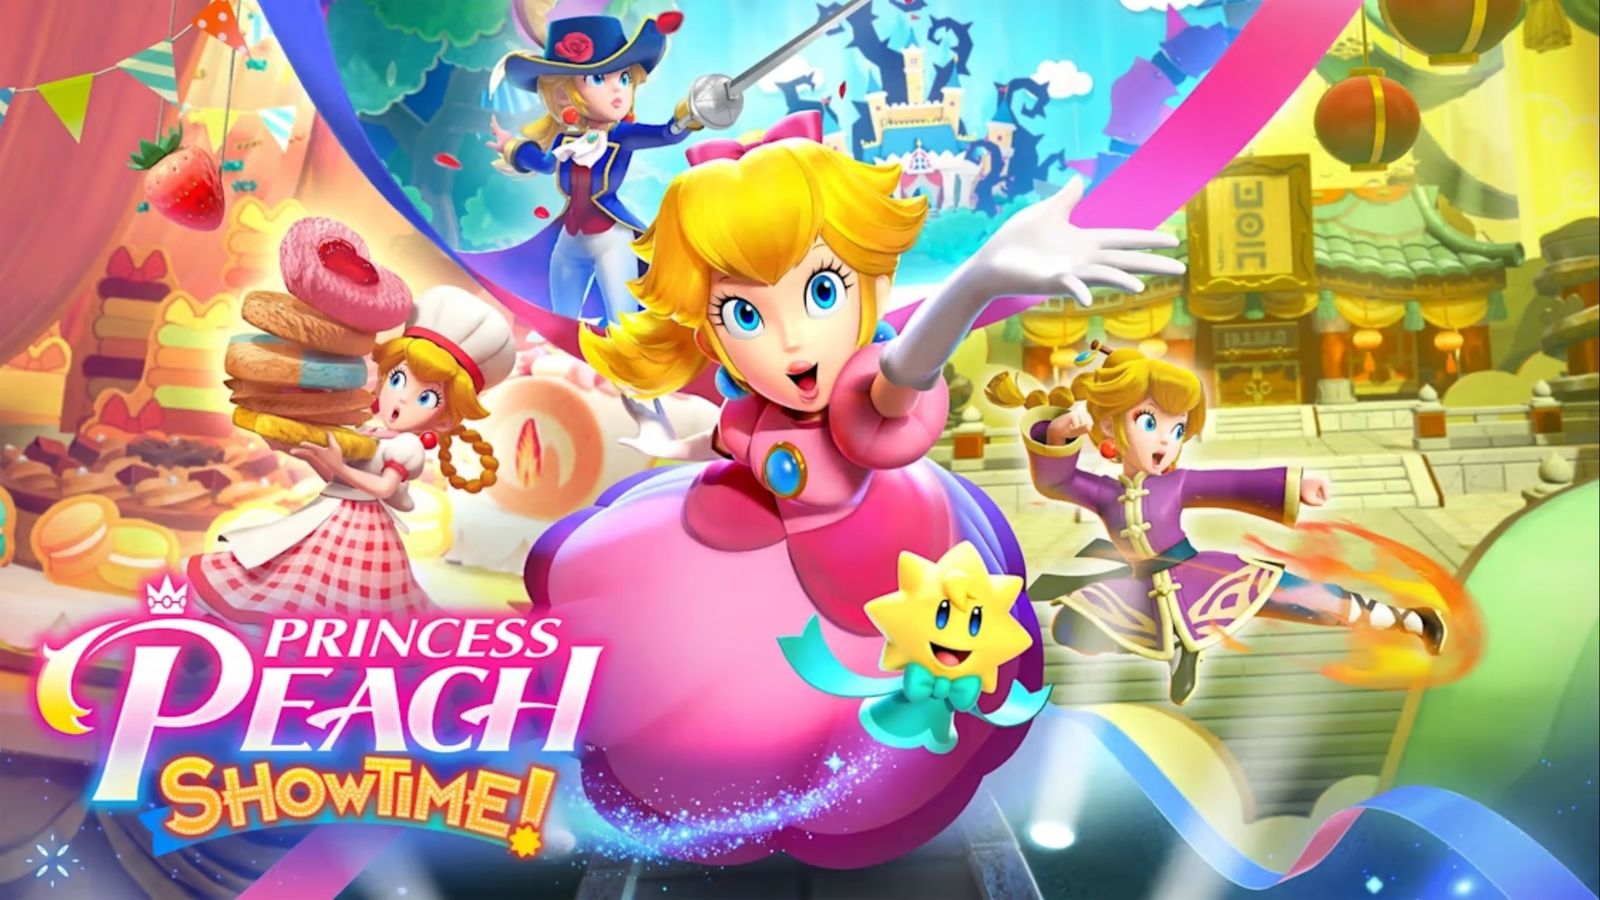 Promotional art showing Peach in Princess Peach: Showtime!